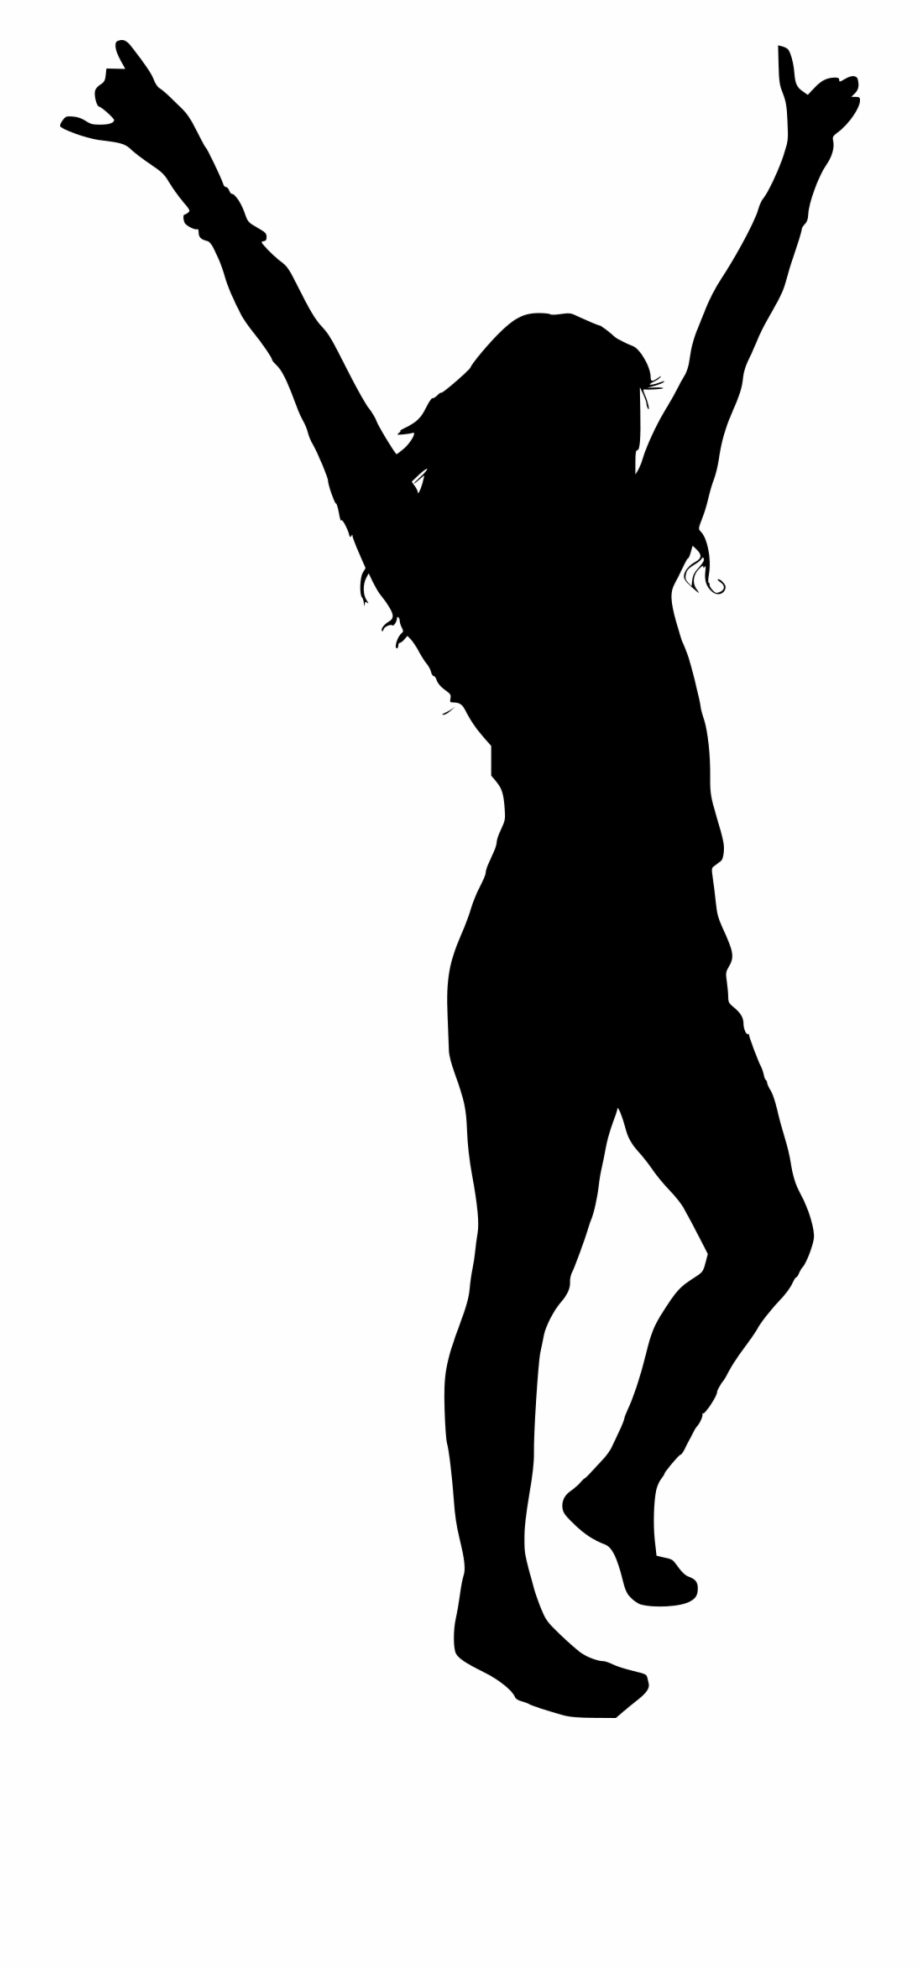 Free Download Silhouette Woman Hand Up